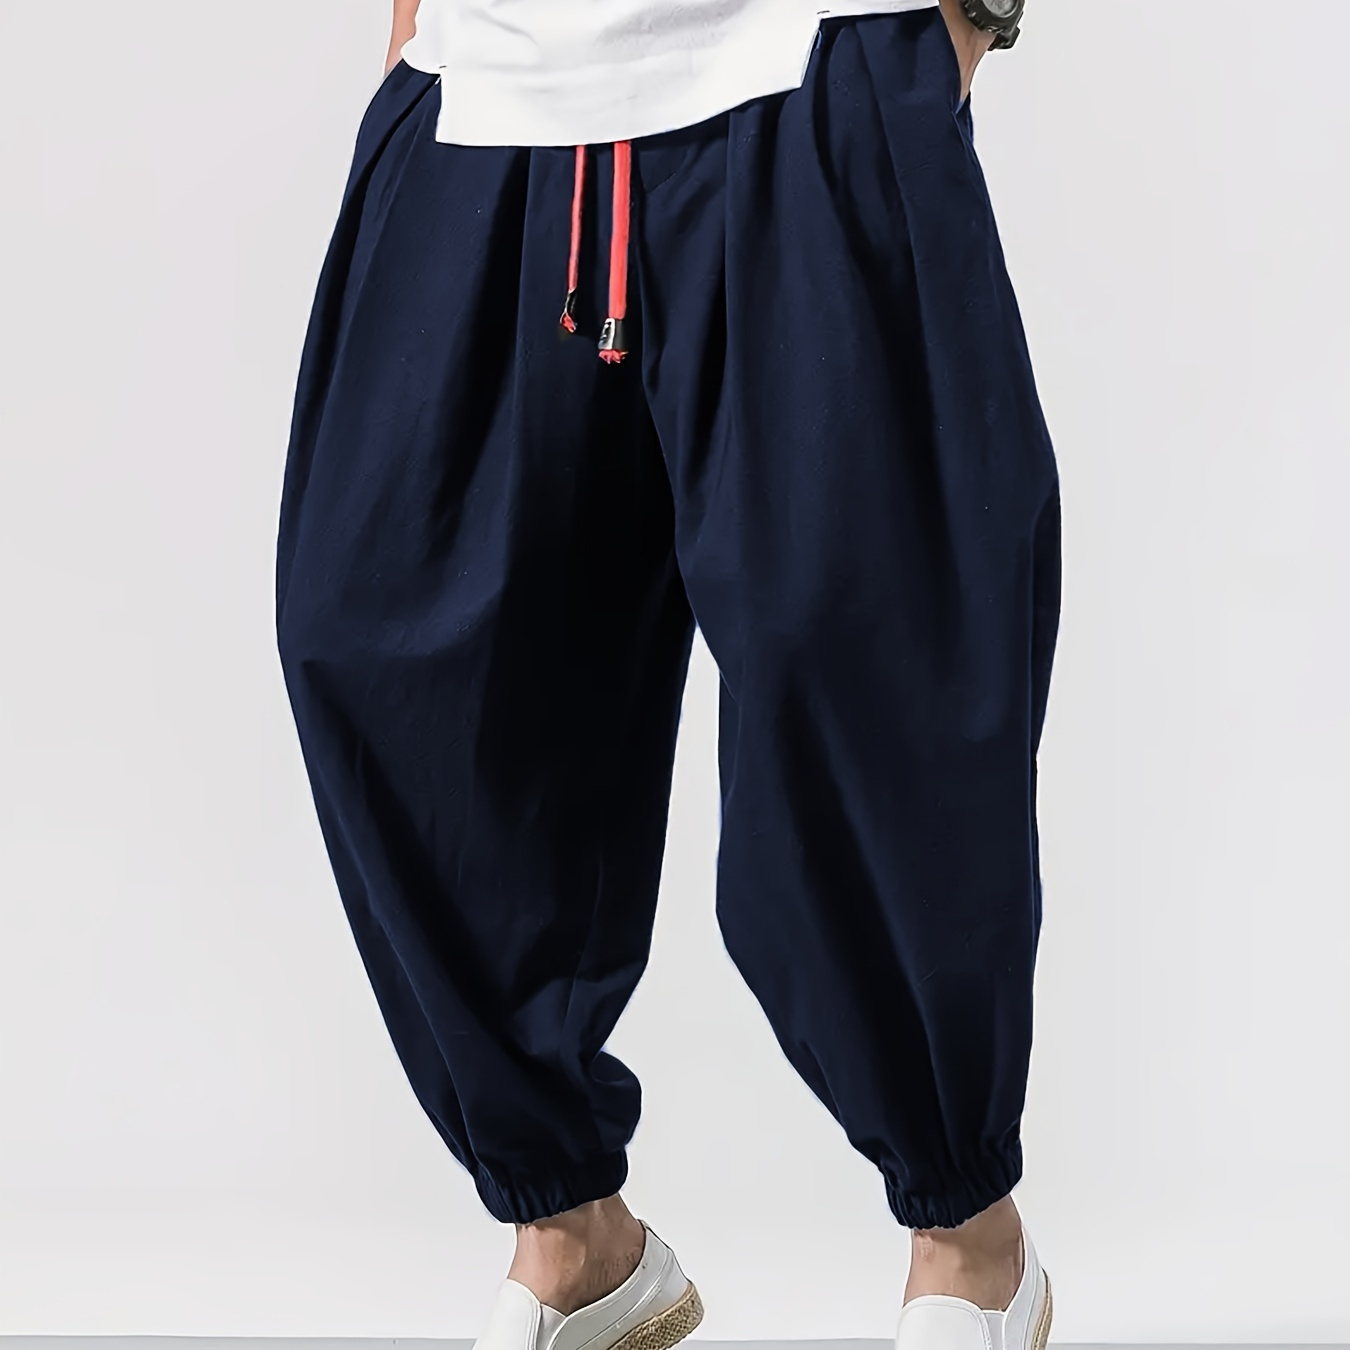 

Men's Casual Solid Comfy Harem Pants With Drawstring, Hip Hop Style Trousers For Spring And Autumn